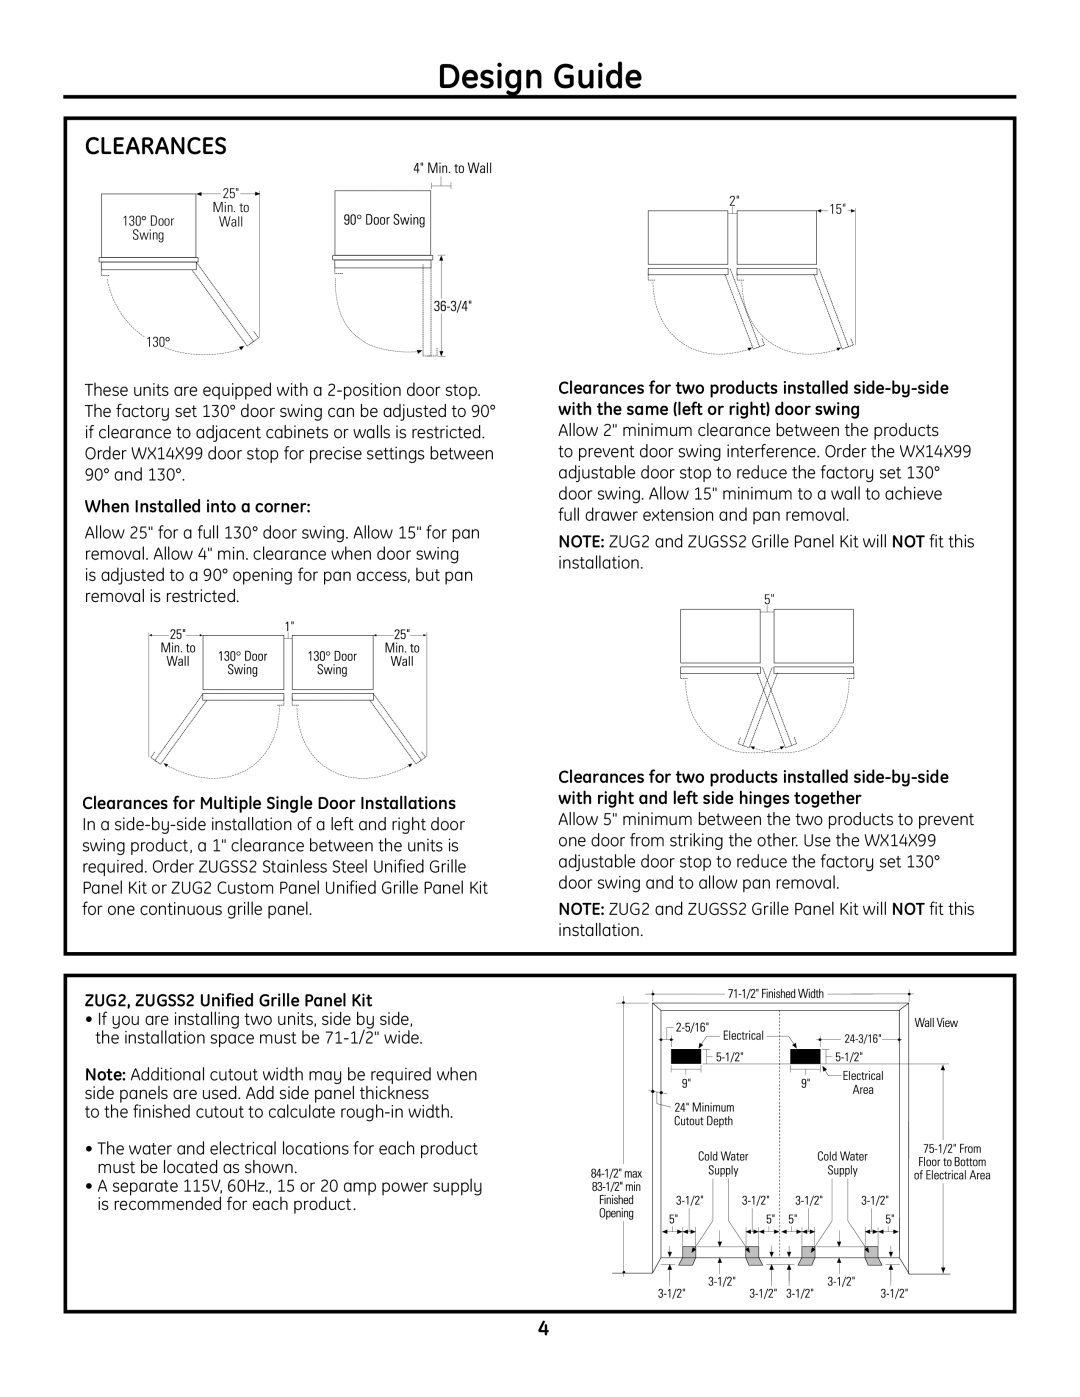 GE Monogram Built-In All-Refrigerator/Freezer Clearances, When Installed into a corner, Design Guide 